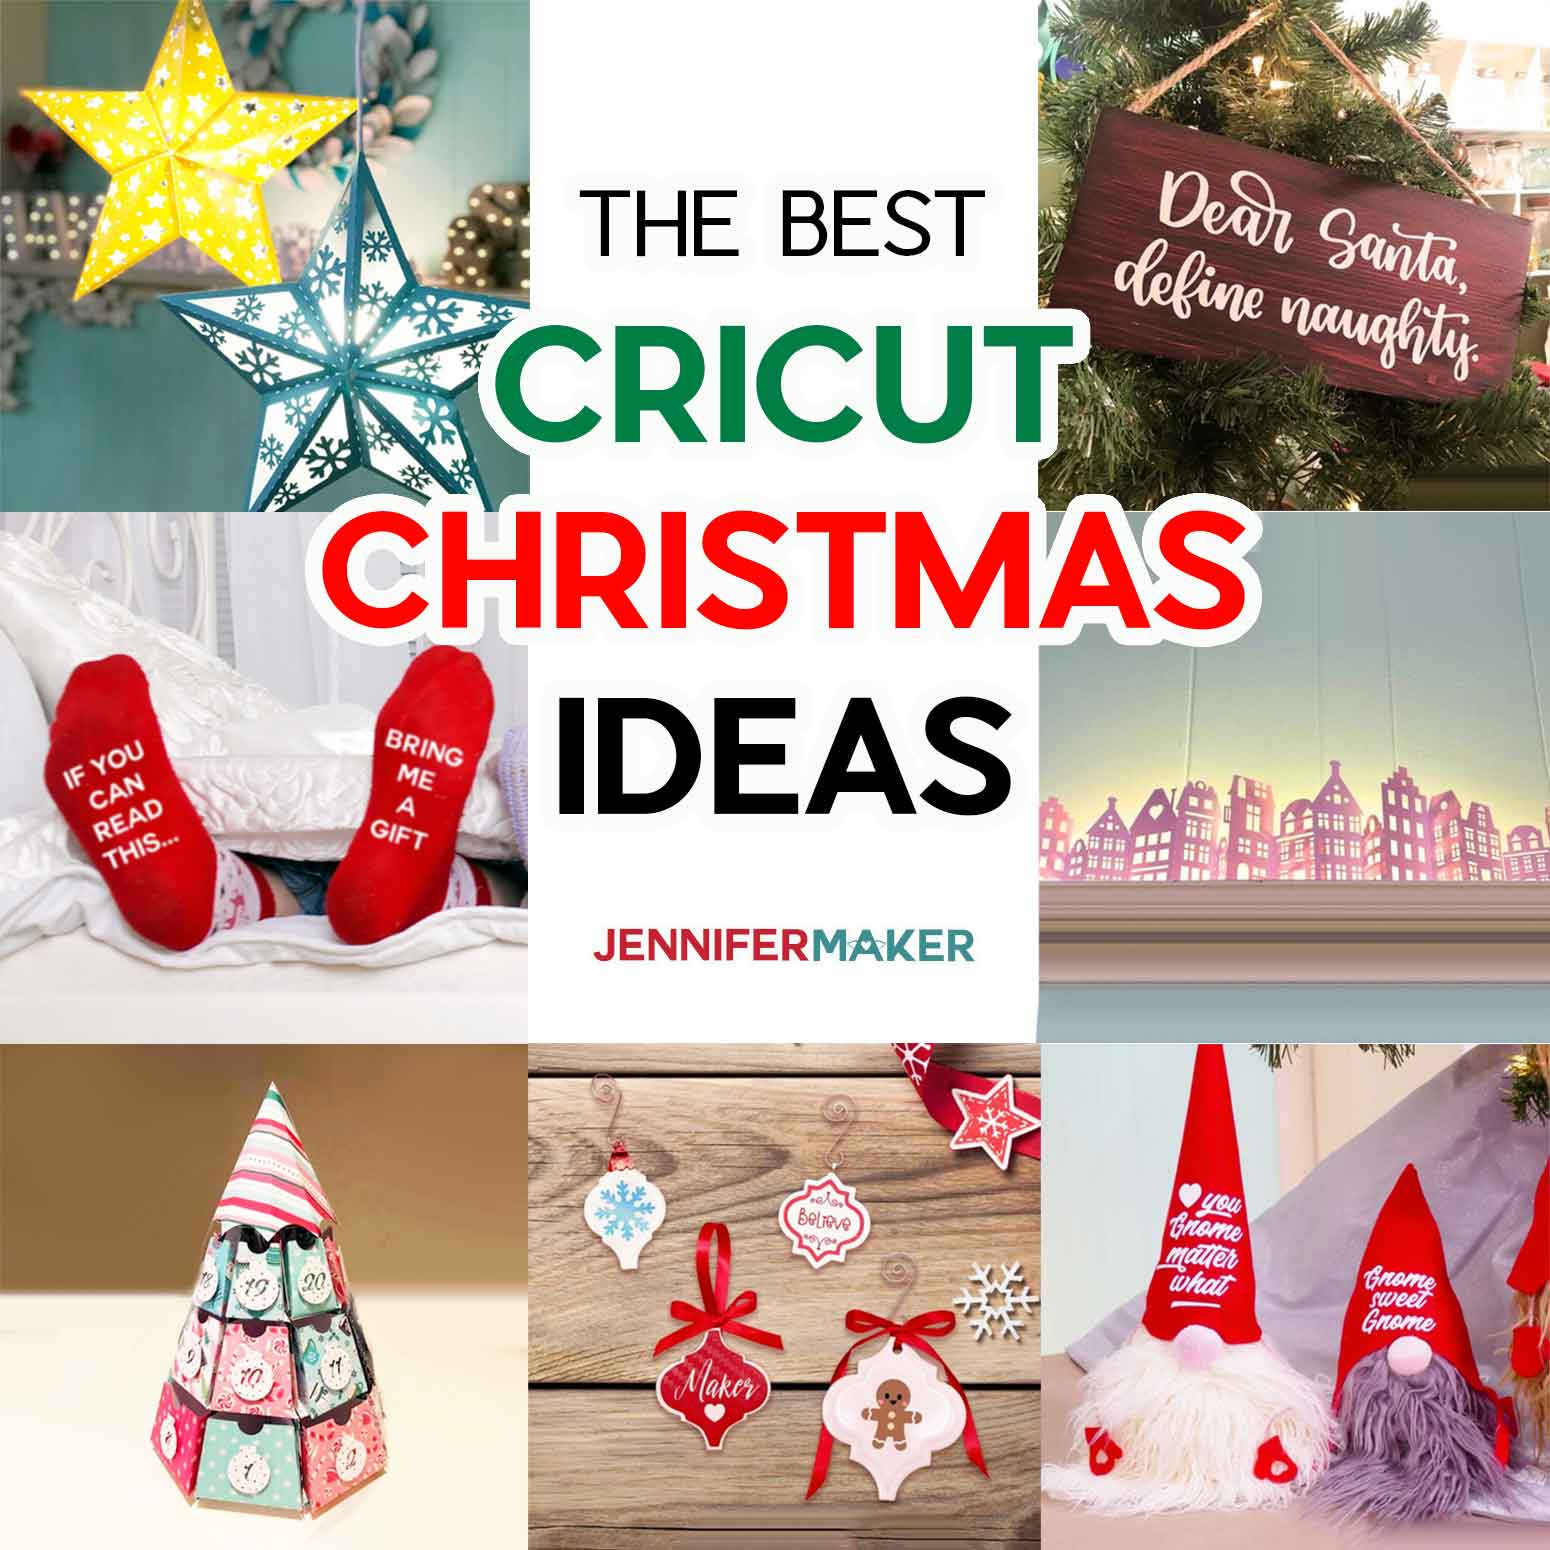 Cricut Christmas Ideas with free SVG cut files, tutorials, and homemade gift ideas